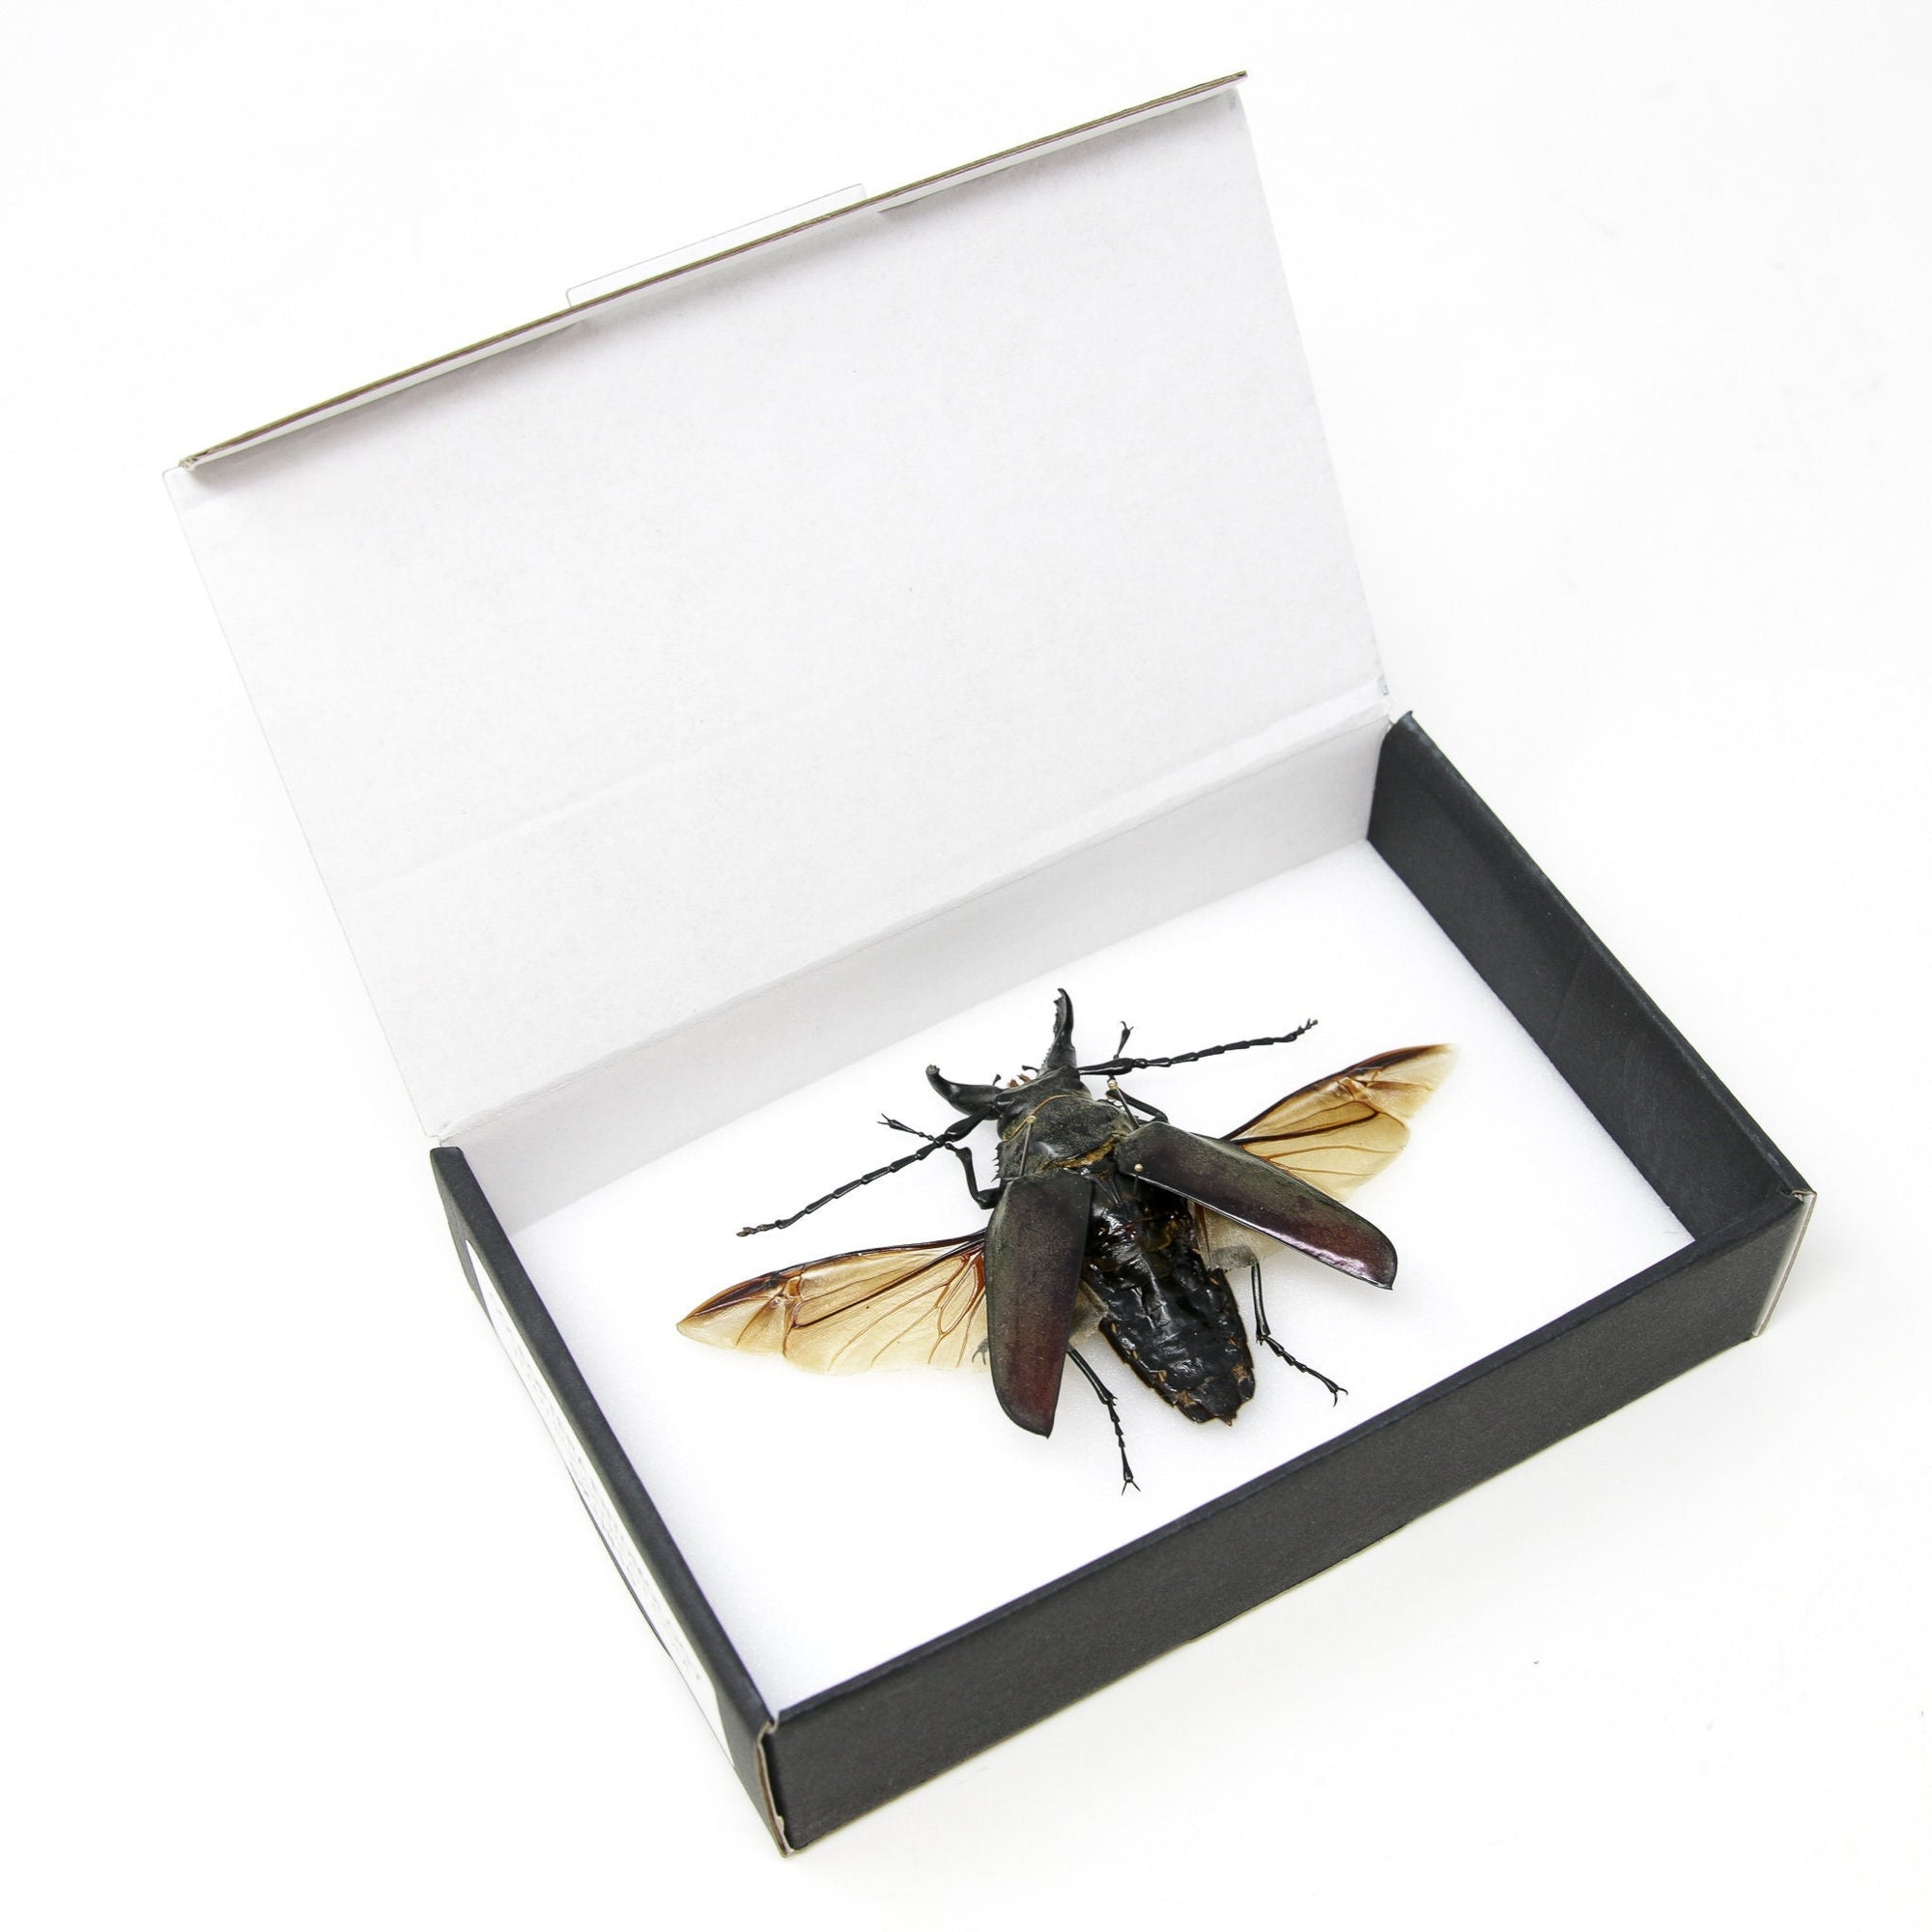 Spread Beetle Specimen with Scientific Collection Data, A1 Quality, Entomology, Real Insect Specimens #SKU15